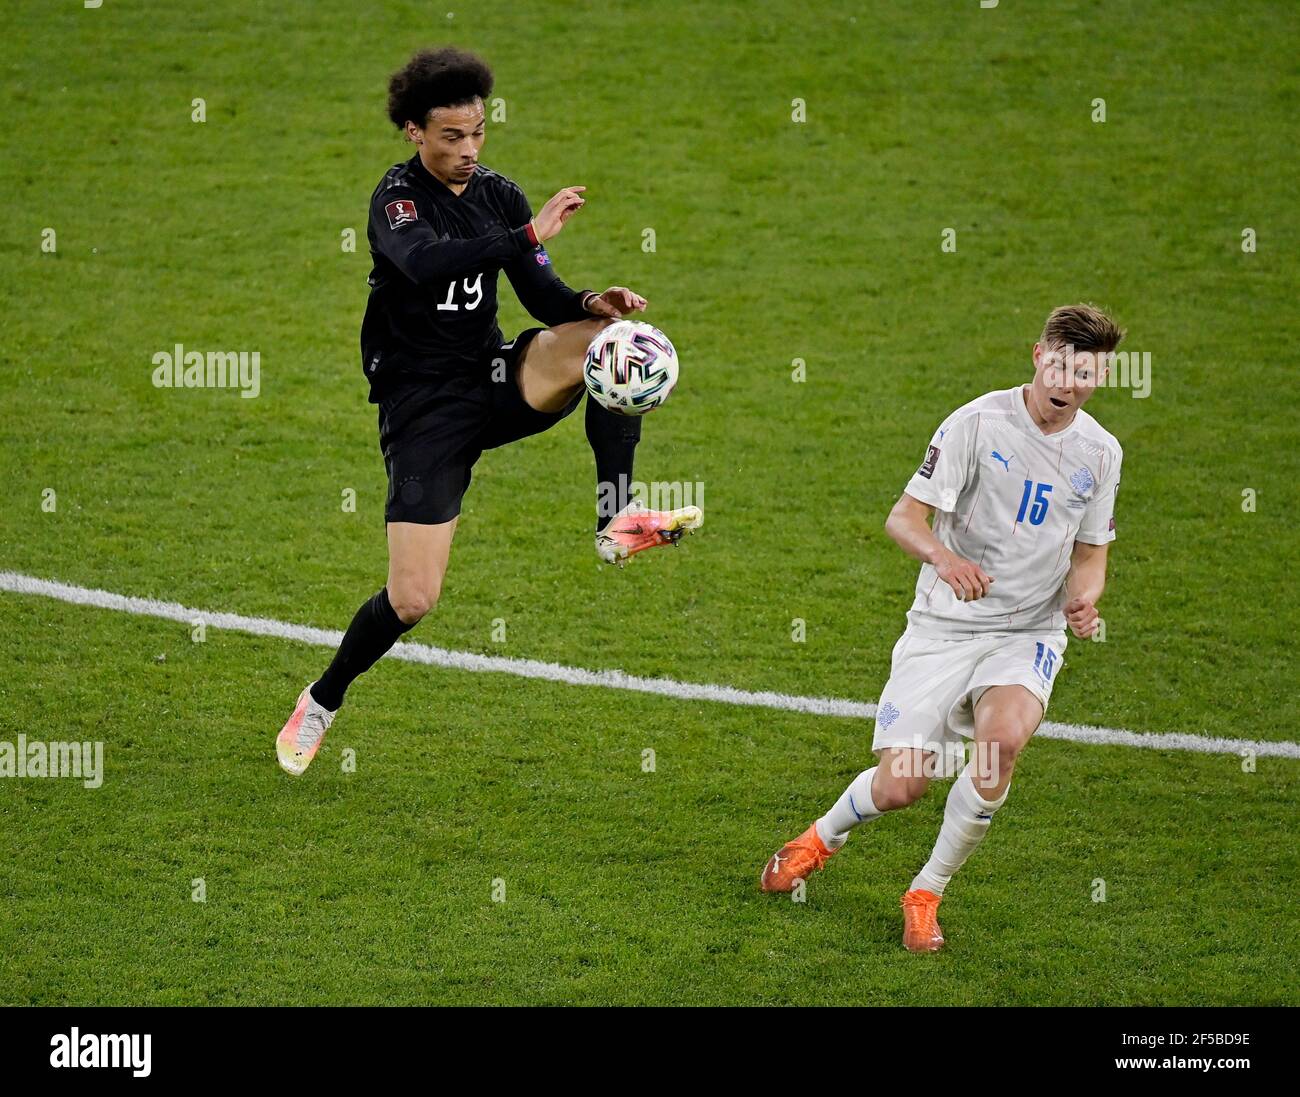 Soccer Football - World Cup Qualifiers Europe - Group J - Germany v Iceland - MSV-Arena, Duisburg, Germany - March 25, 2021 Germany's Leroy Sane in action with Iceland's Alfons Sampsted REUTERS/Tobias Schwarz Stock Photo